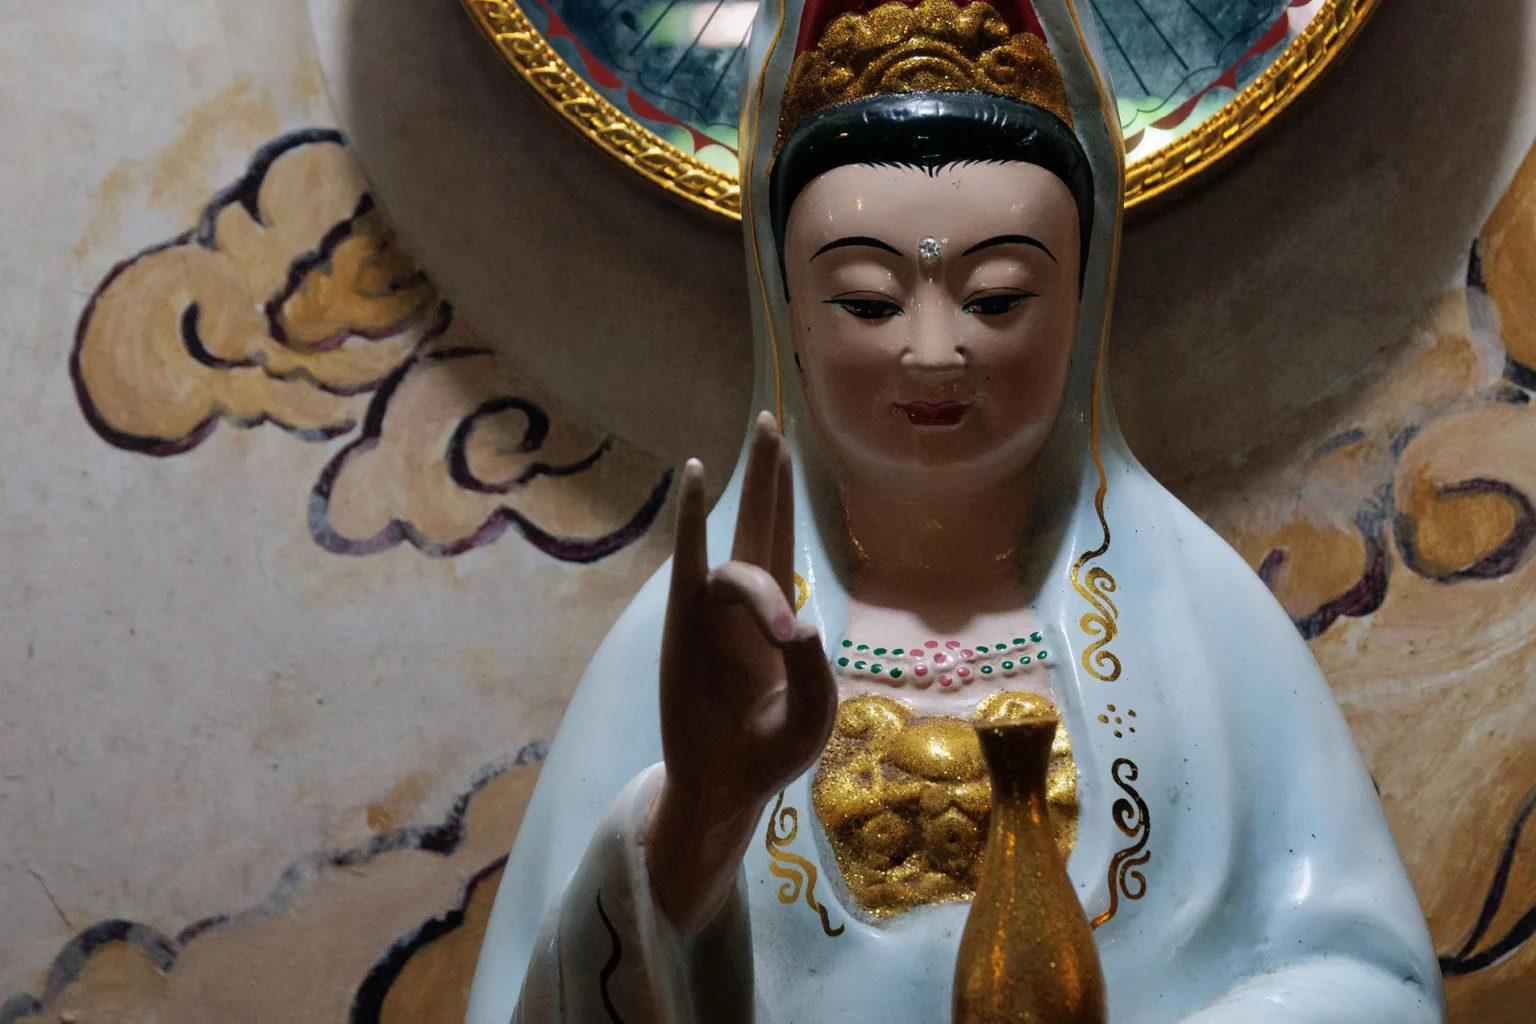 Statue of Guan Yin in an old temple in the unesco city of Hoi An, Vietnam